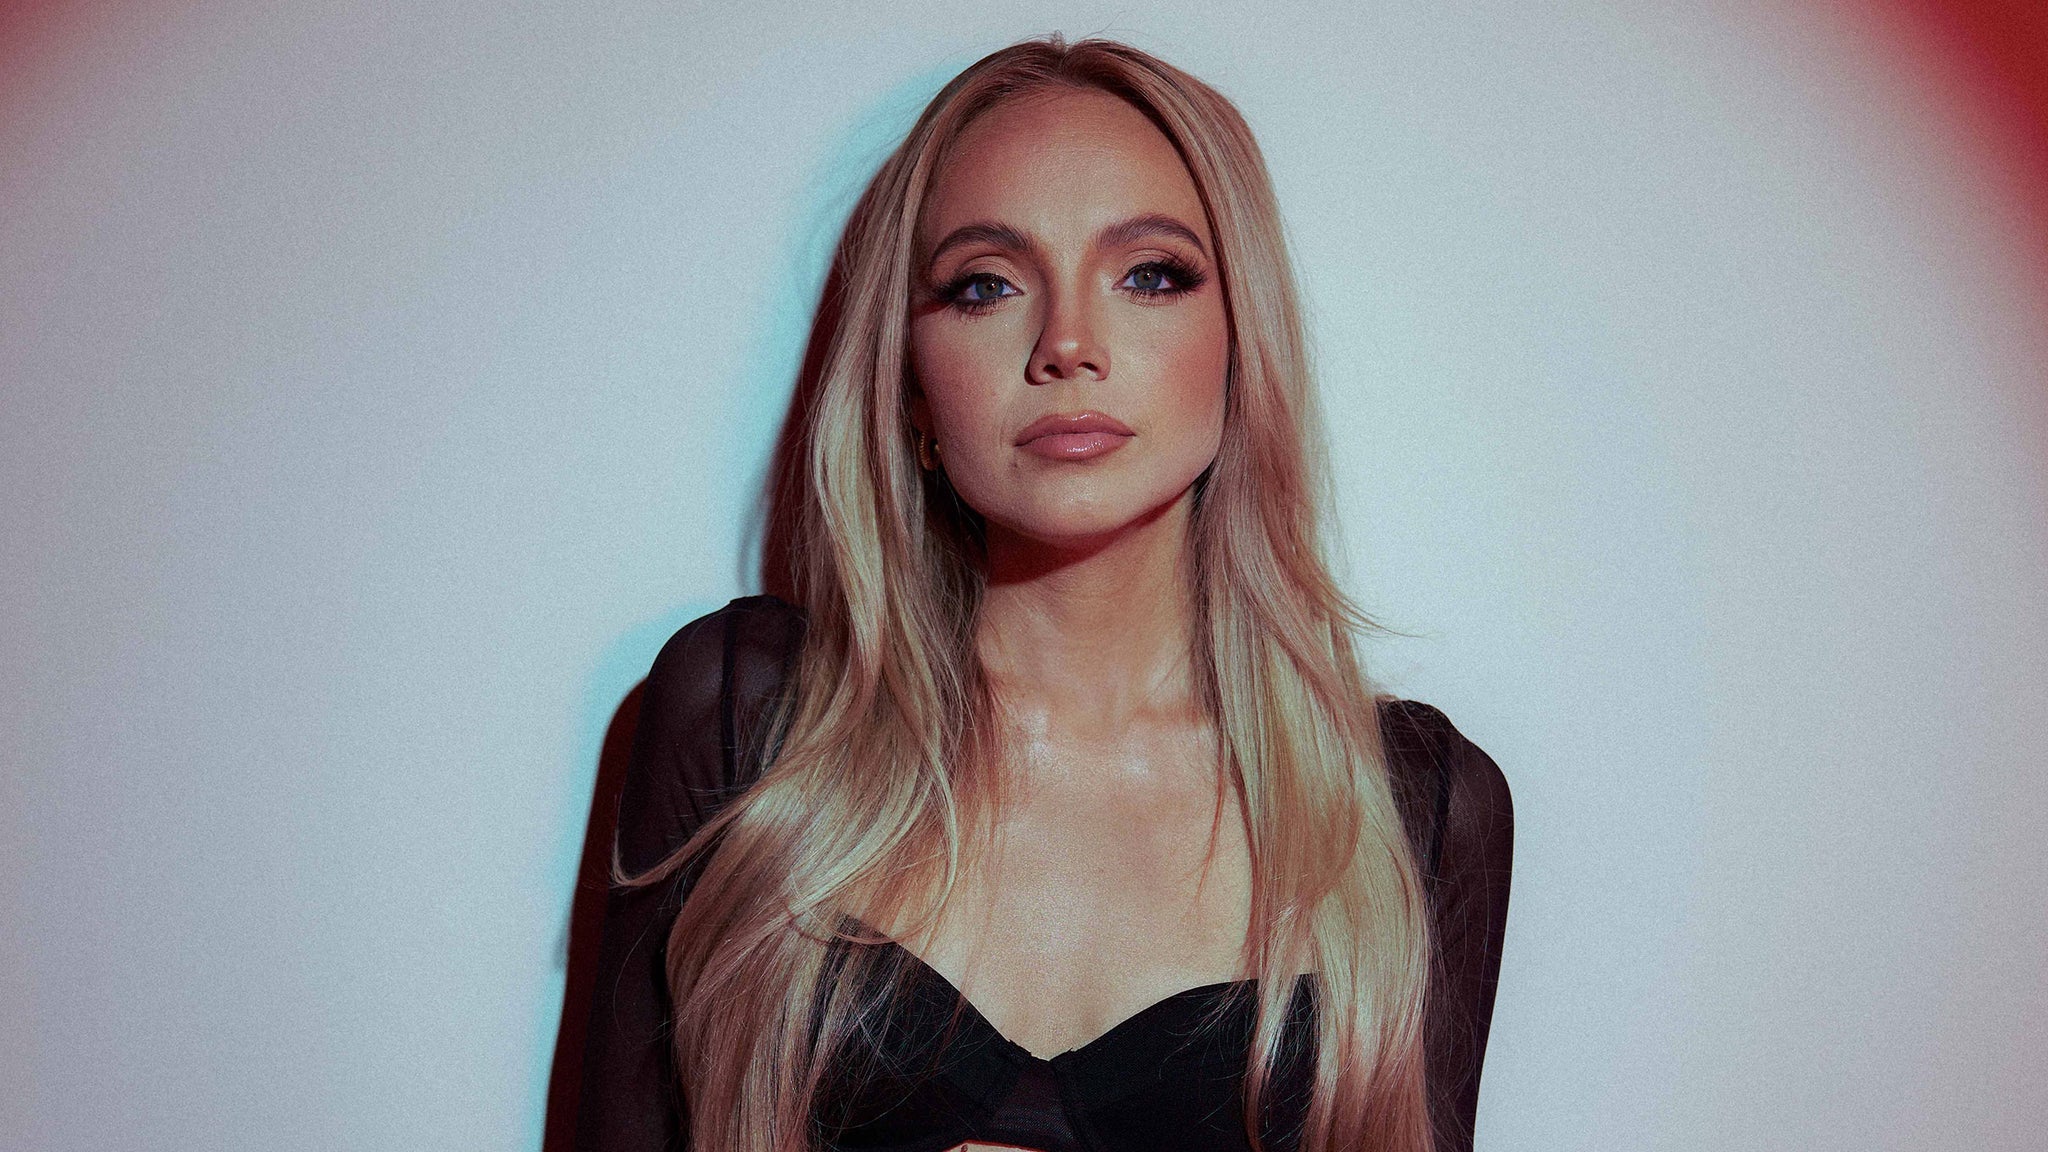 Danielle Bradbery: A Special Place Tour with Tiera Kennedy